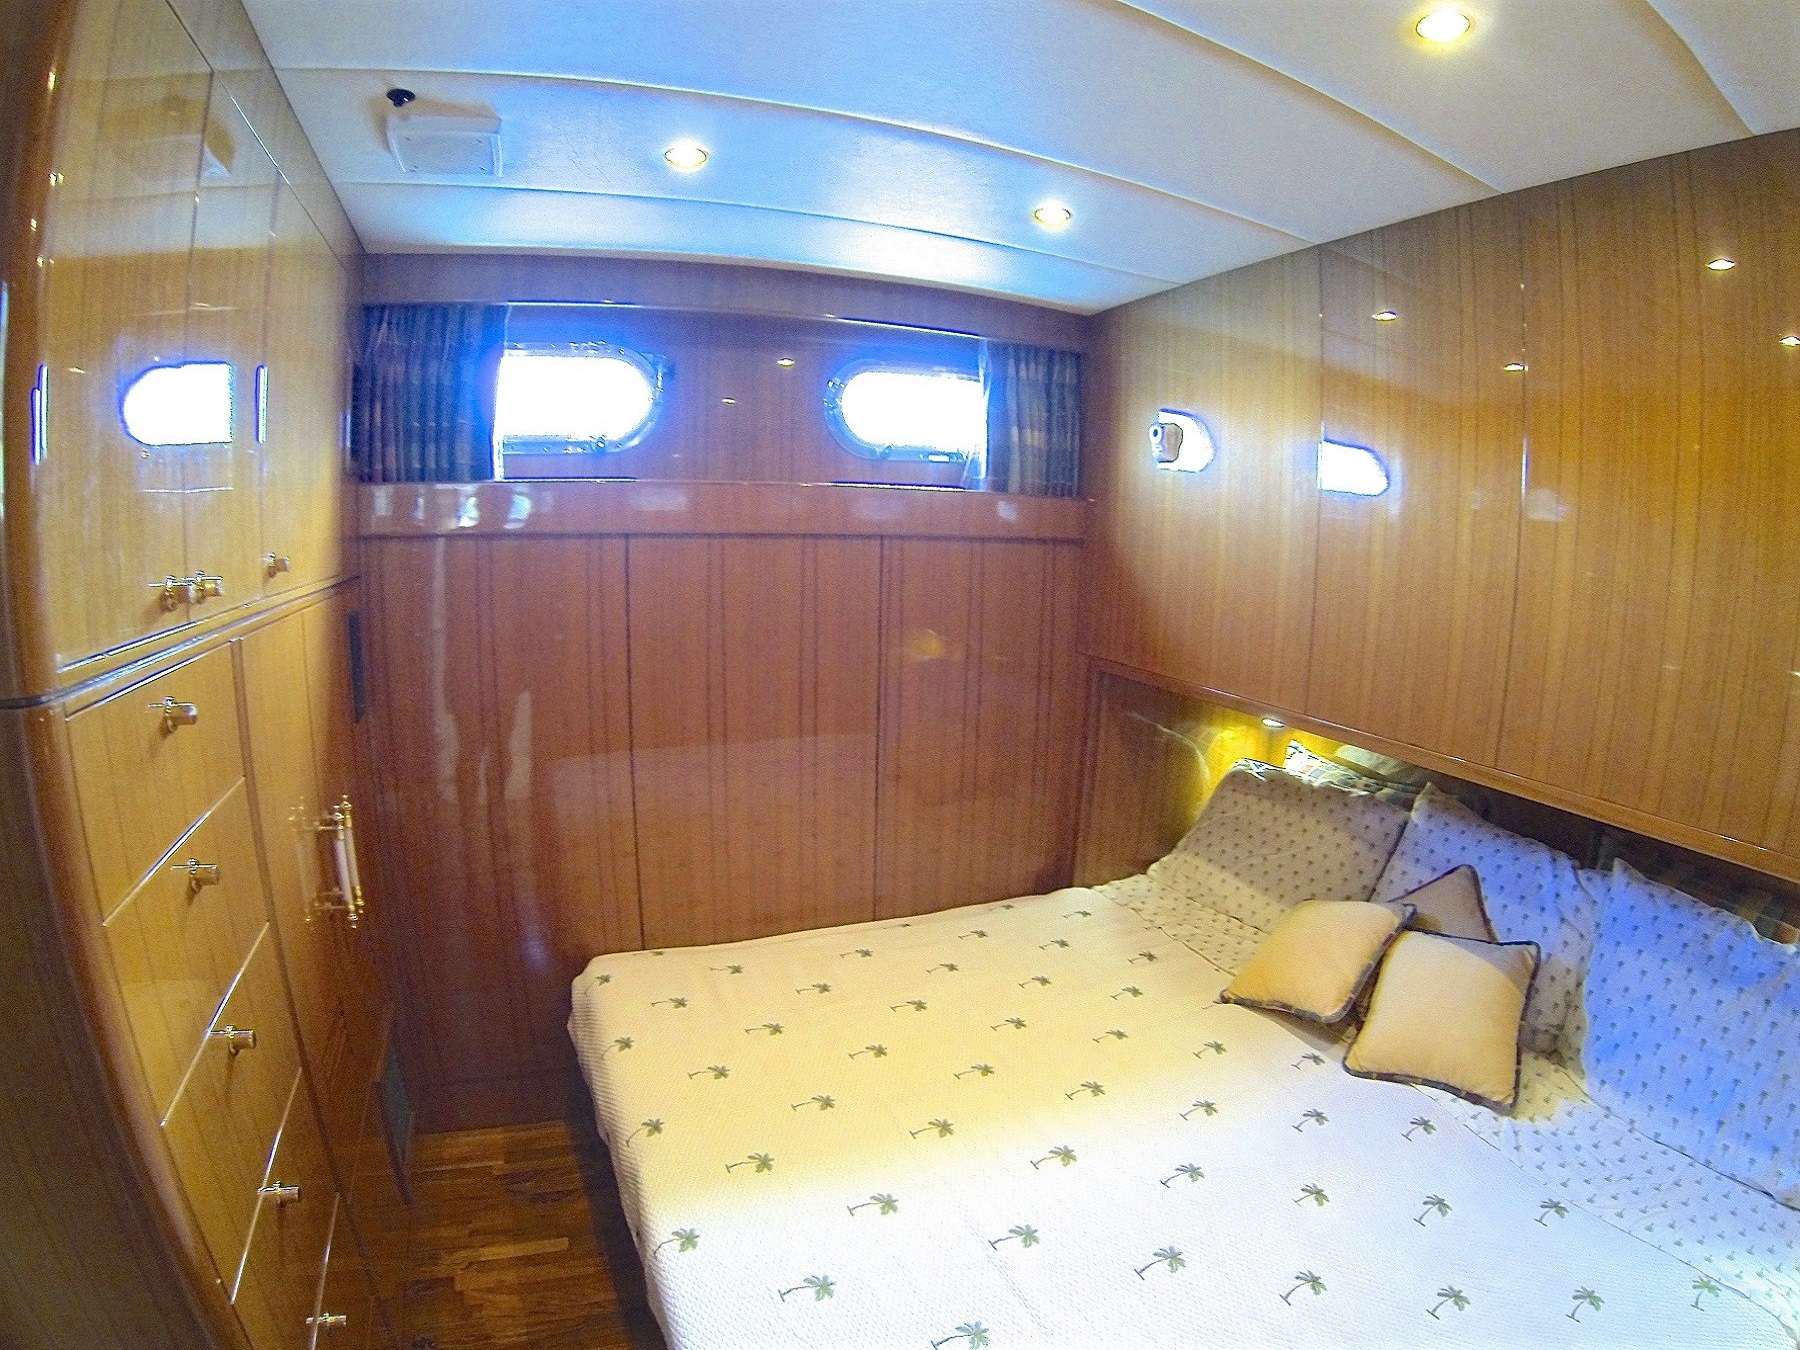 MCGREGOR III Yacht Charter - Single bed cabin converted to King